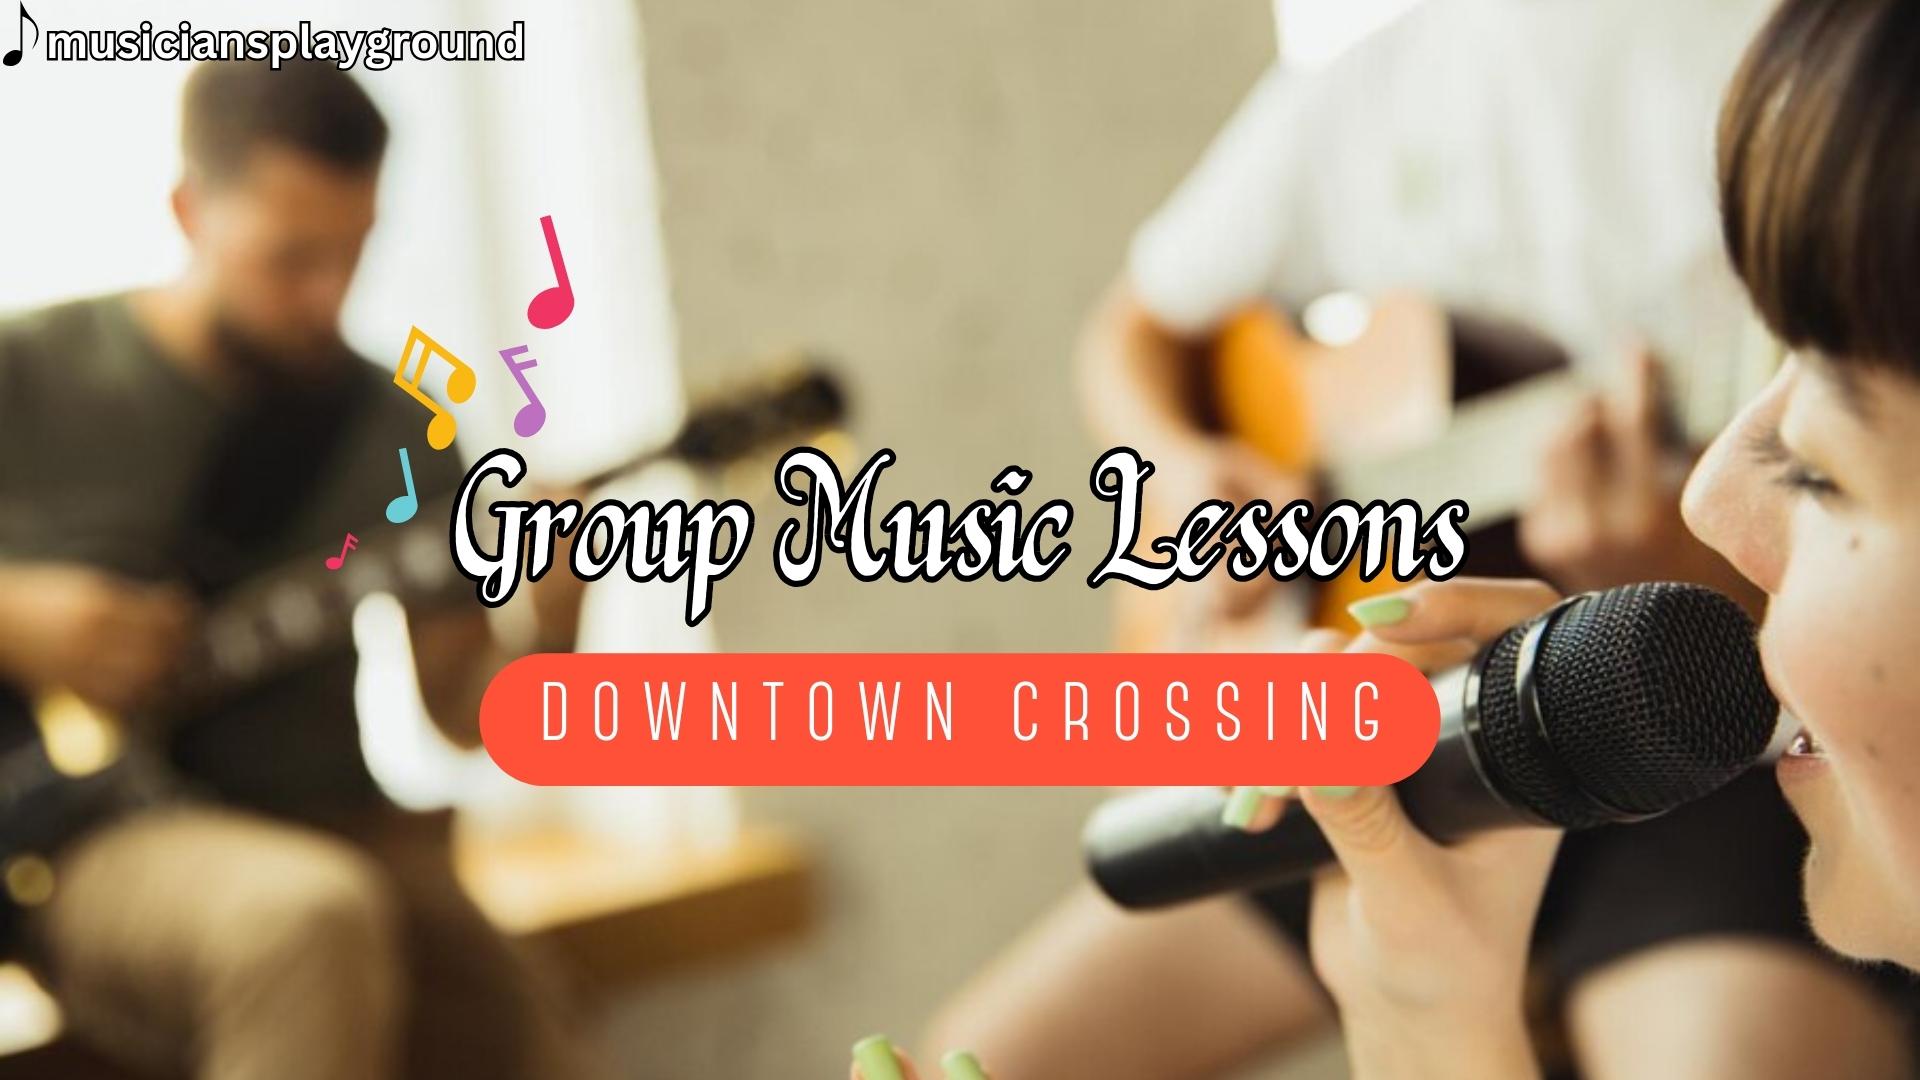 Group Music Lessons in Downtown Crossing, Massachusetts: Enhancing Musical Skills at Musicians Playground